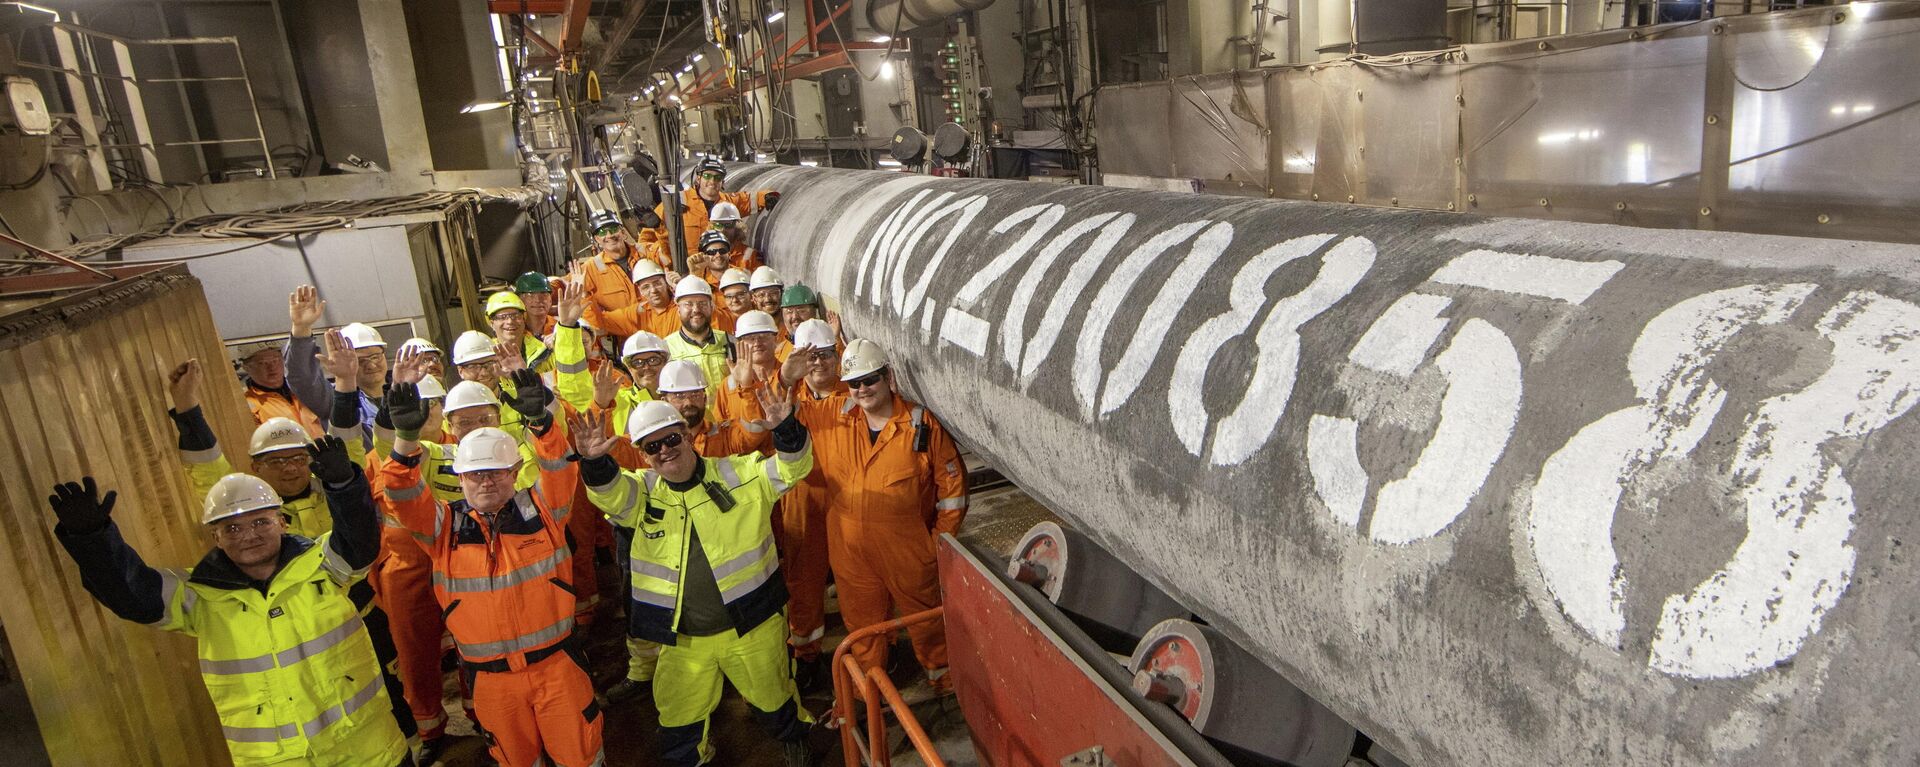 Specialists pose for a picture after welding the last pipe of the Nord Stream 2 gas subsea pipeline onboard the laybarge Fortuna in German waters in the Baltic Sea, September 6, 2021 - Sputnik International, 1920, 19.11.2021